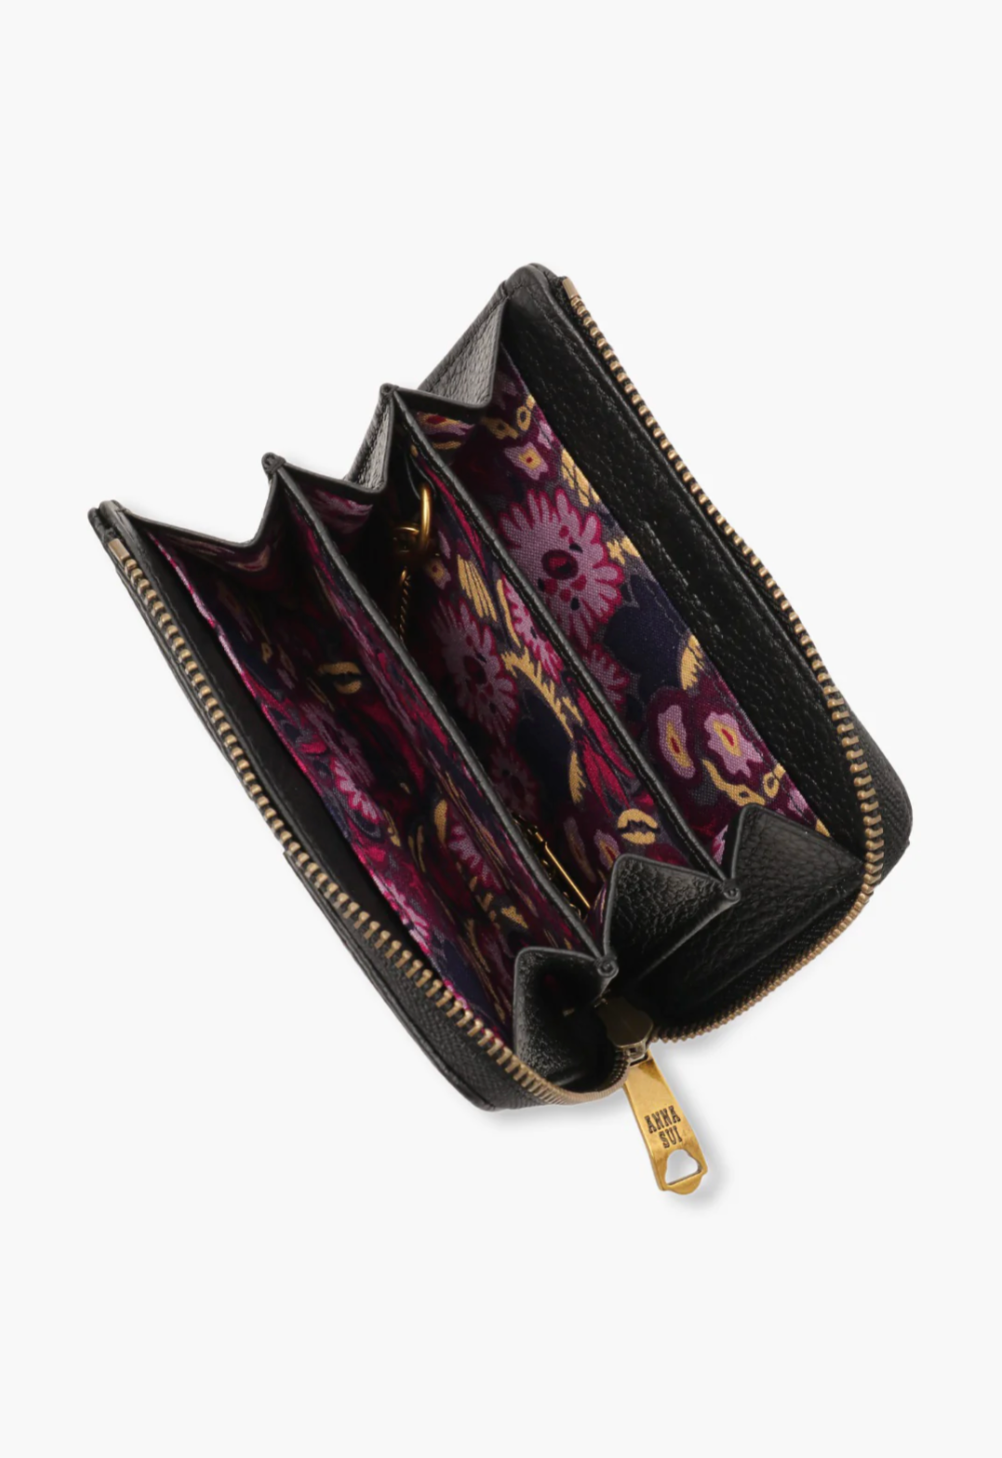 Nova Small Wallet black, 5 card slots and 3 open compartments, floral fabric inside 